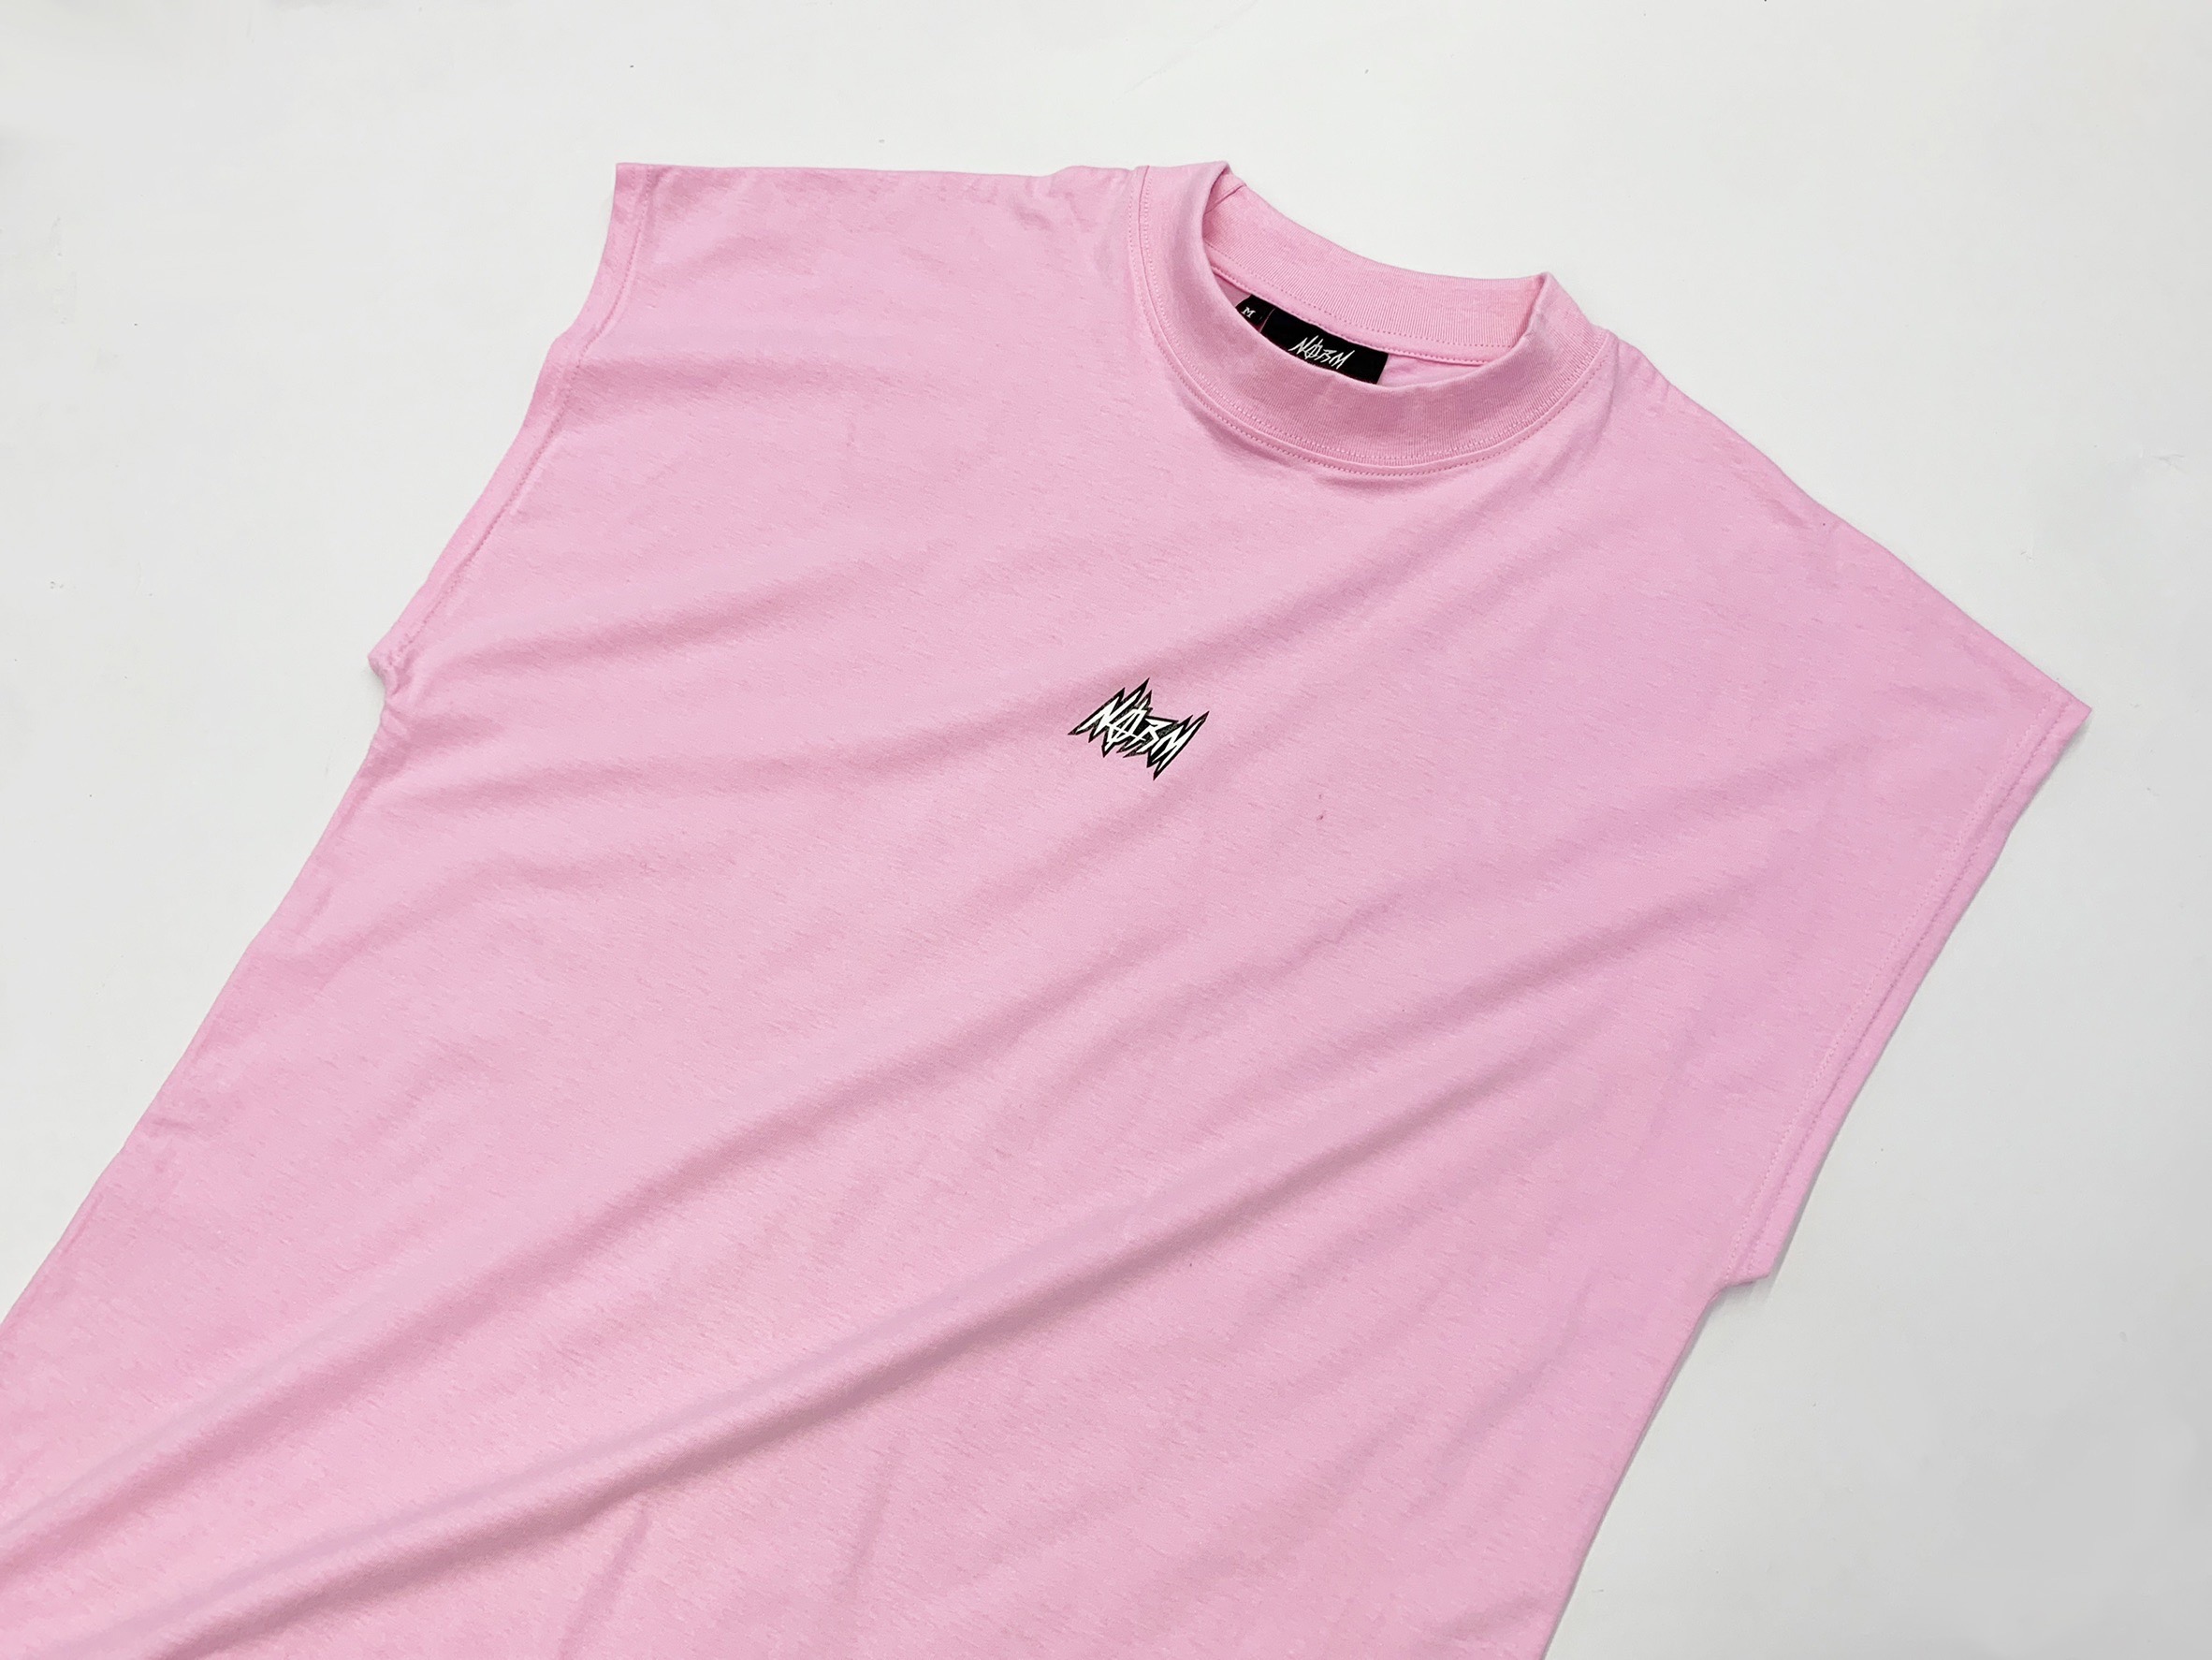 Just Norm - NOS TEE PINK